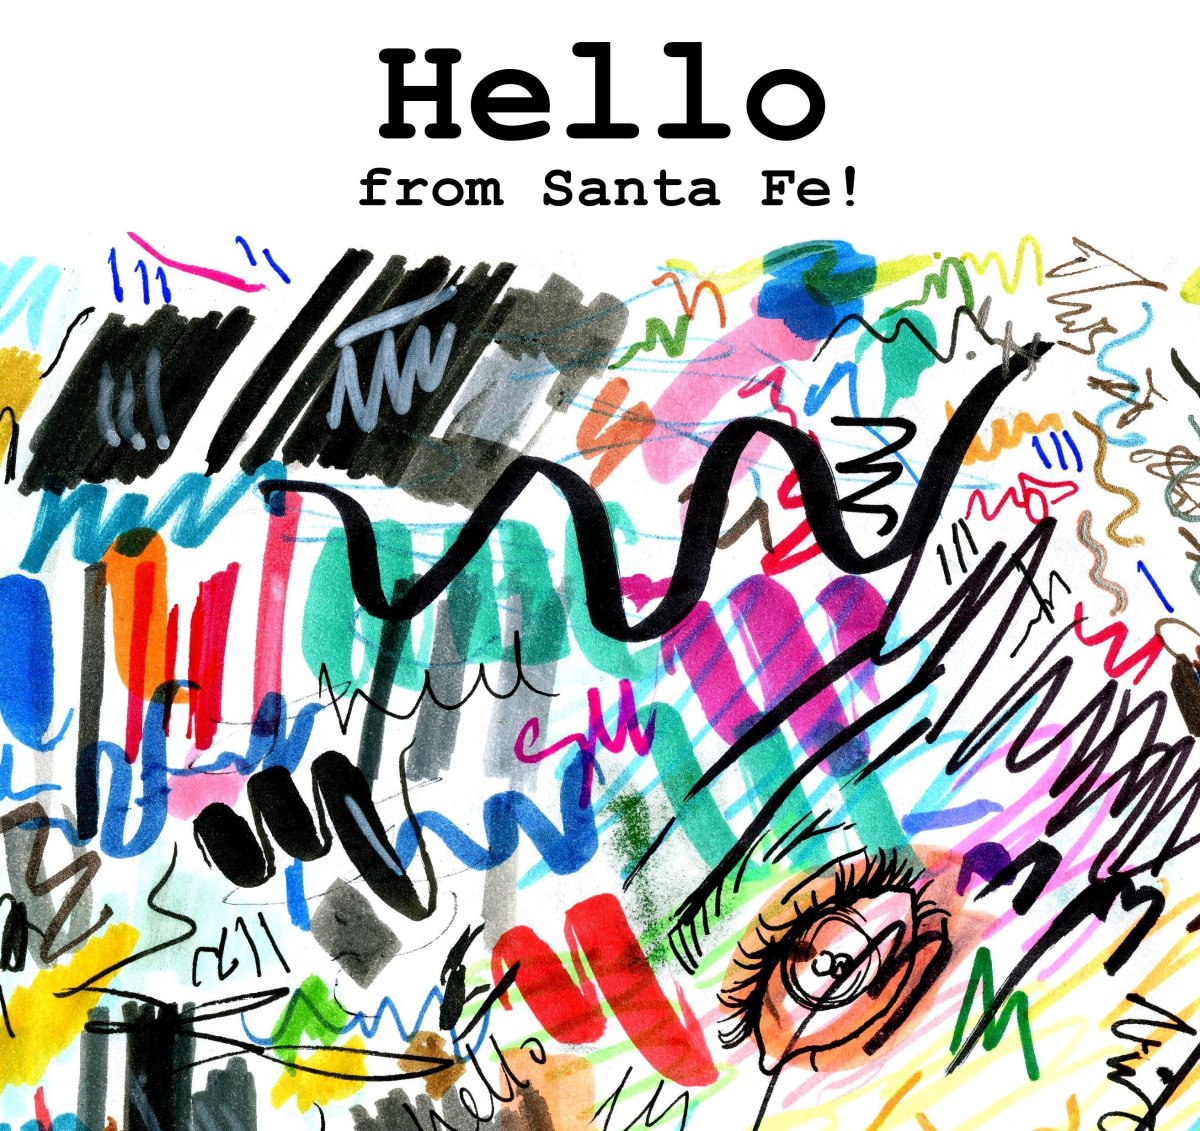 You are currently viewing New Fluxus Laboratories Publication: “Hello from Santa Fe!”